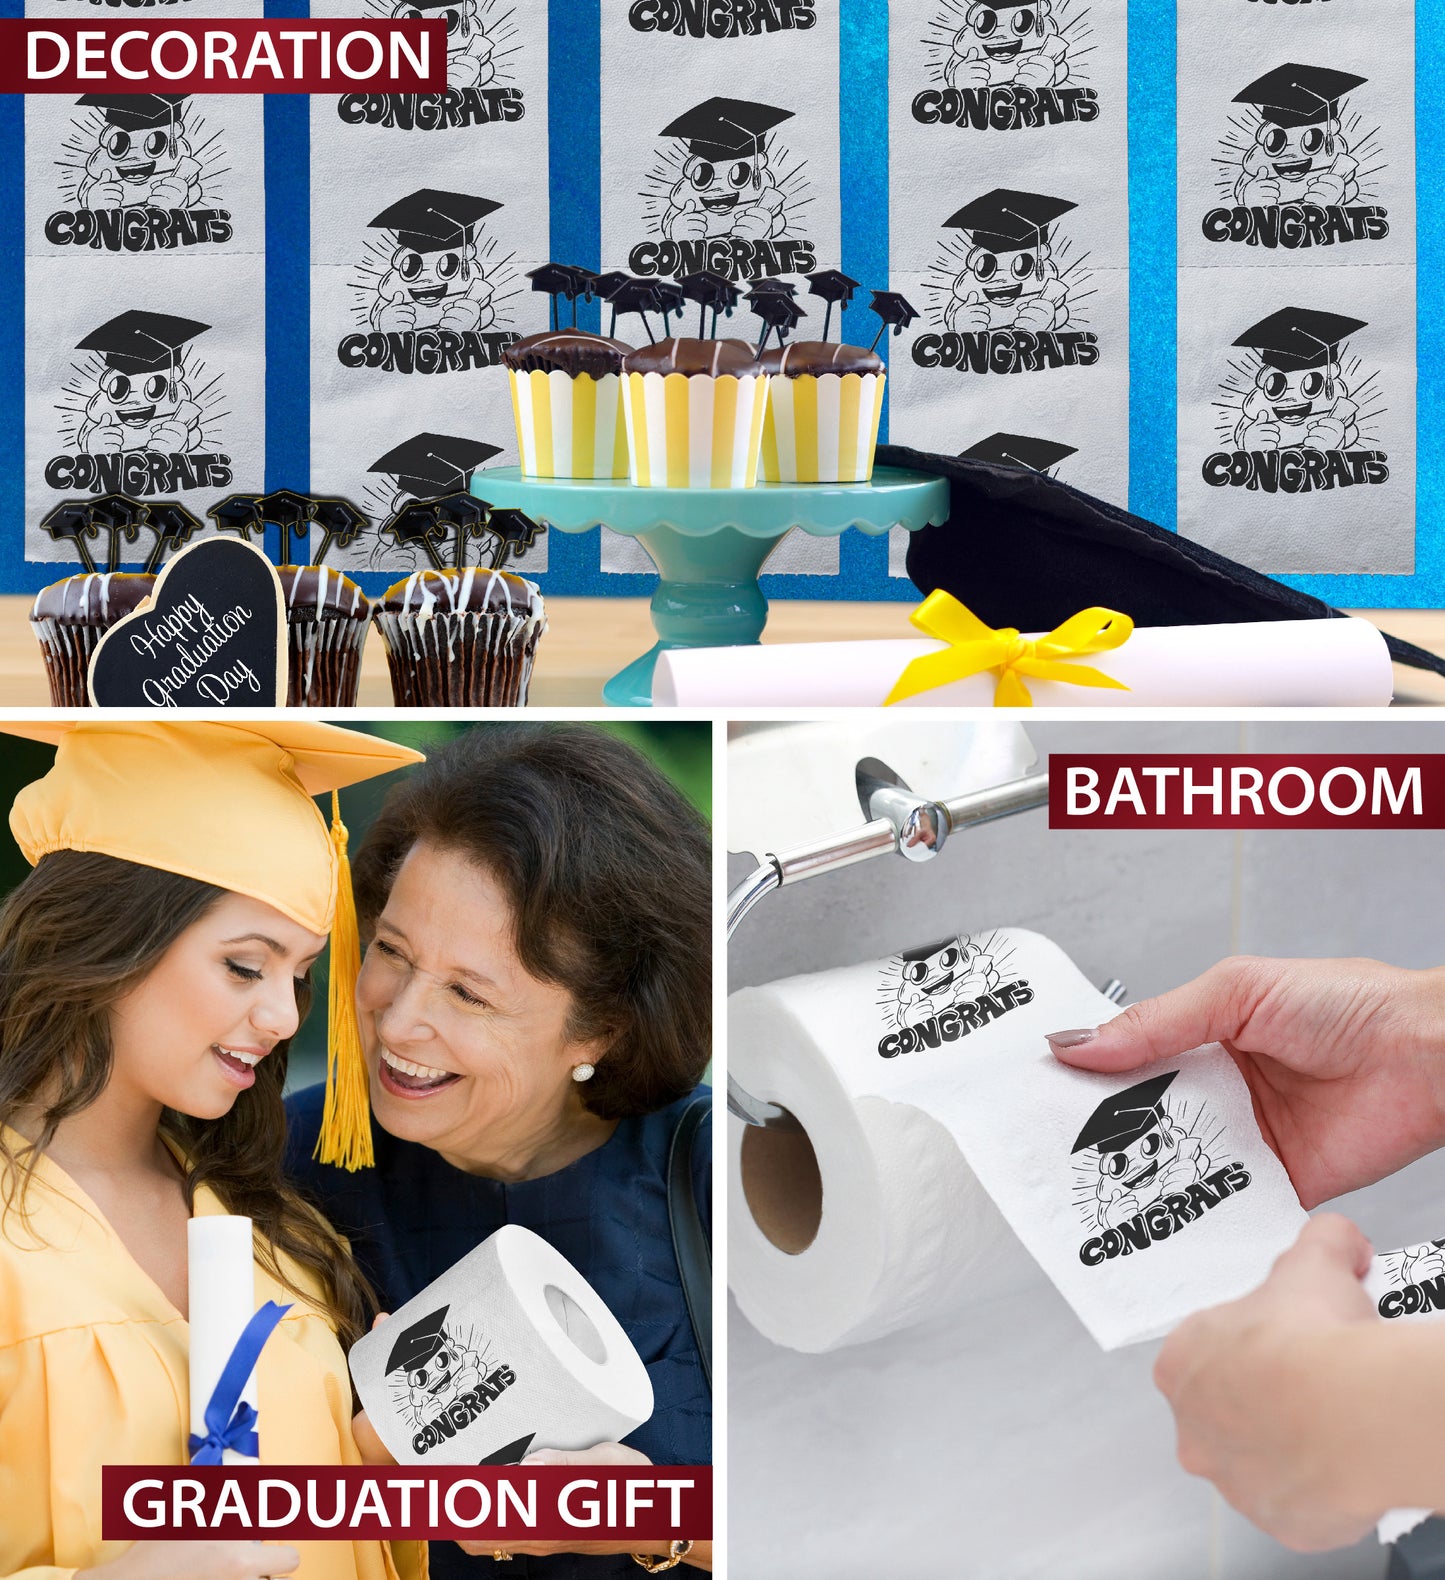 Printed TP Congrats with Excited Poop Printed Toilet Paper Gag Gift, 500 Sheets